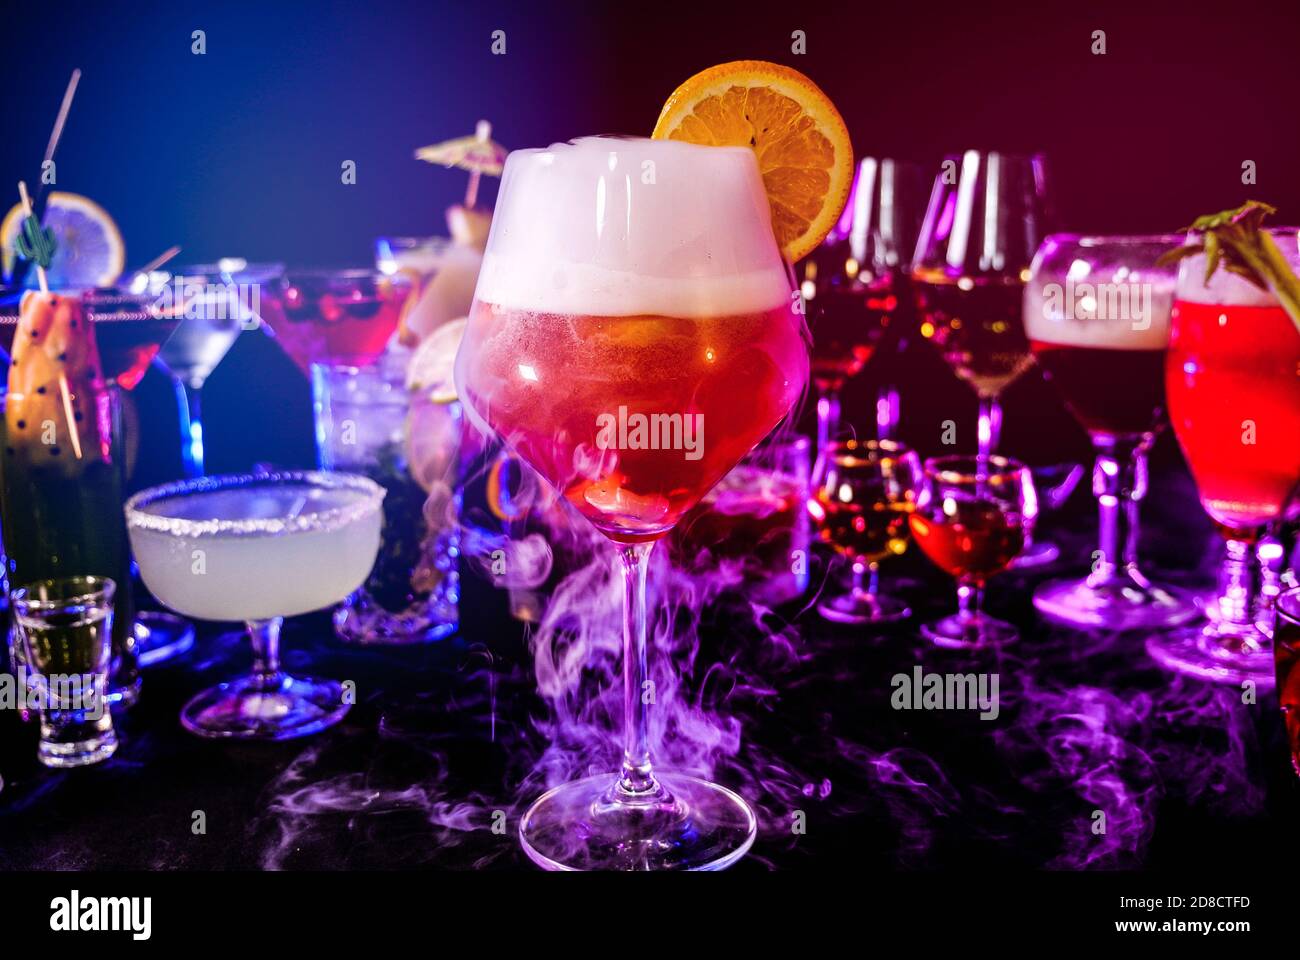 Aperol spritz drink with dry ice at bar counter close up. Bartender show and prepared cocktail with dry ice on a cocktail bar background. Stock Photo